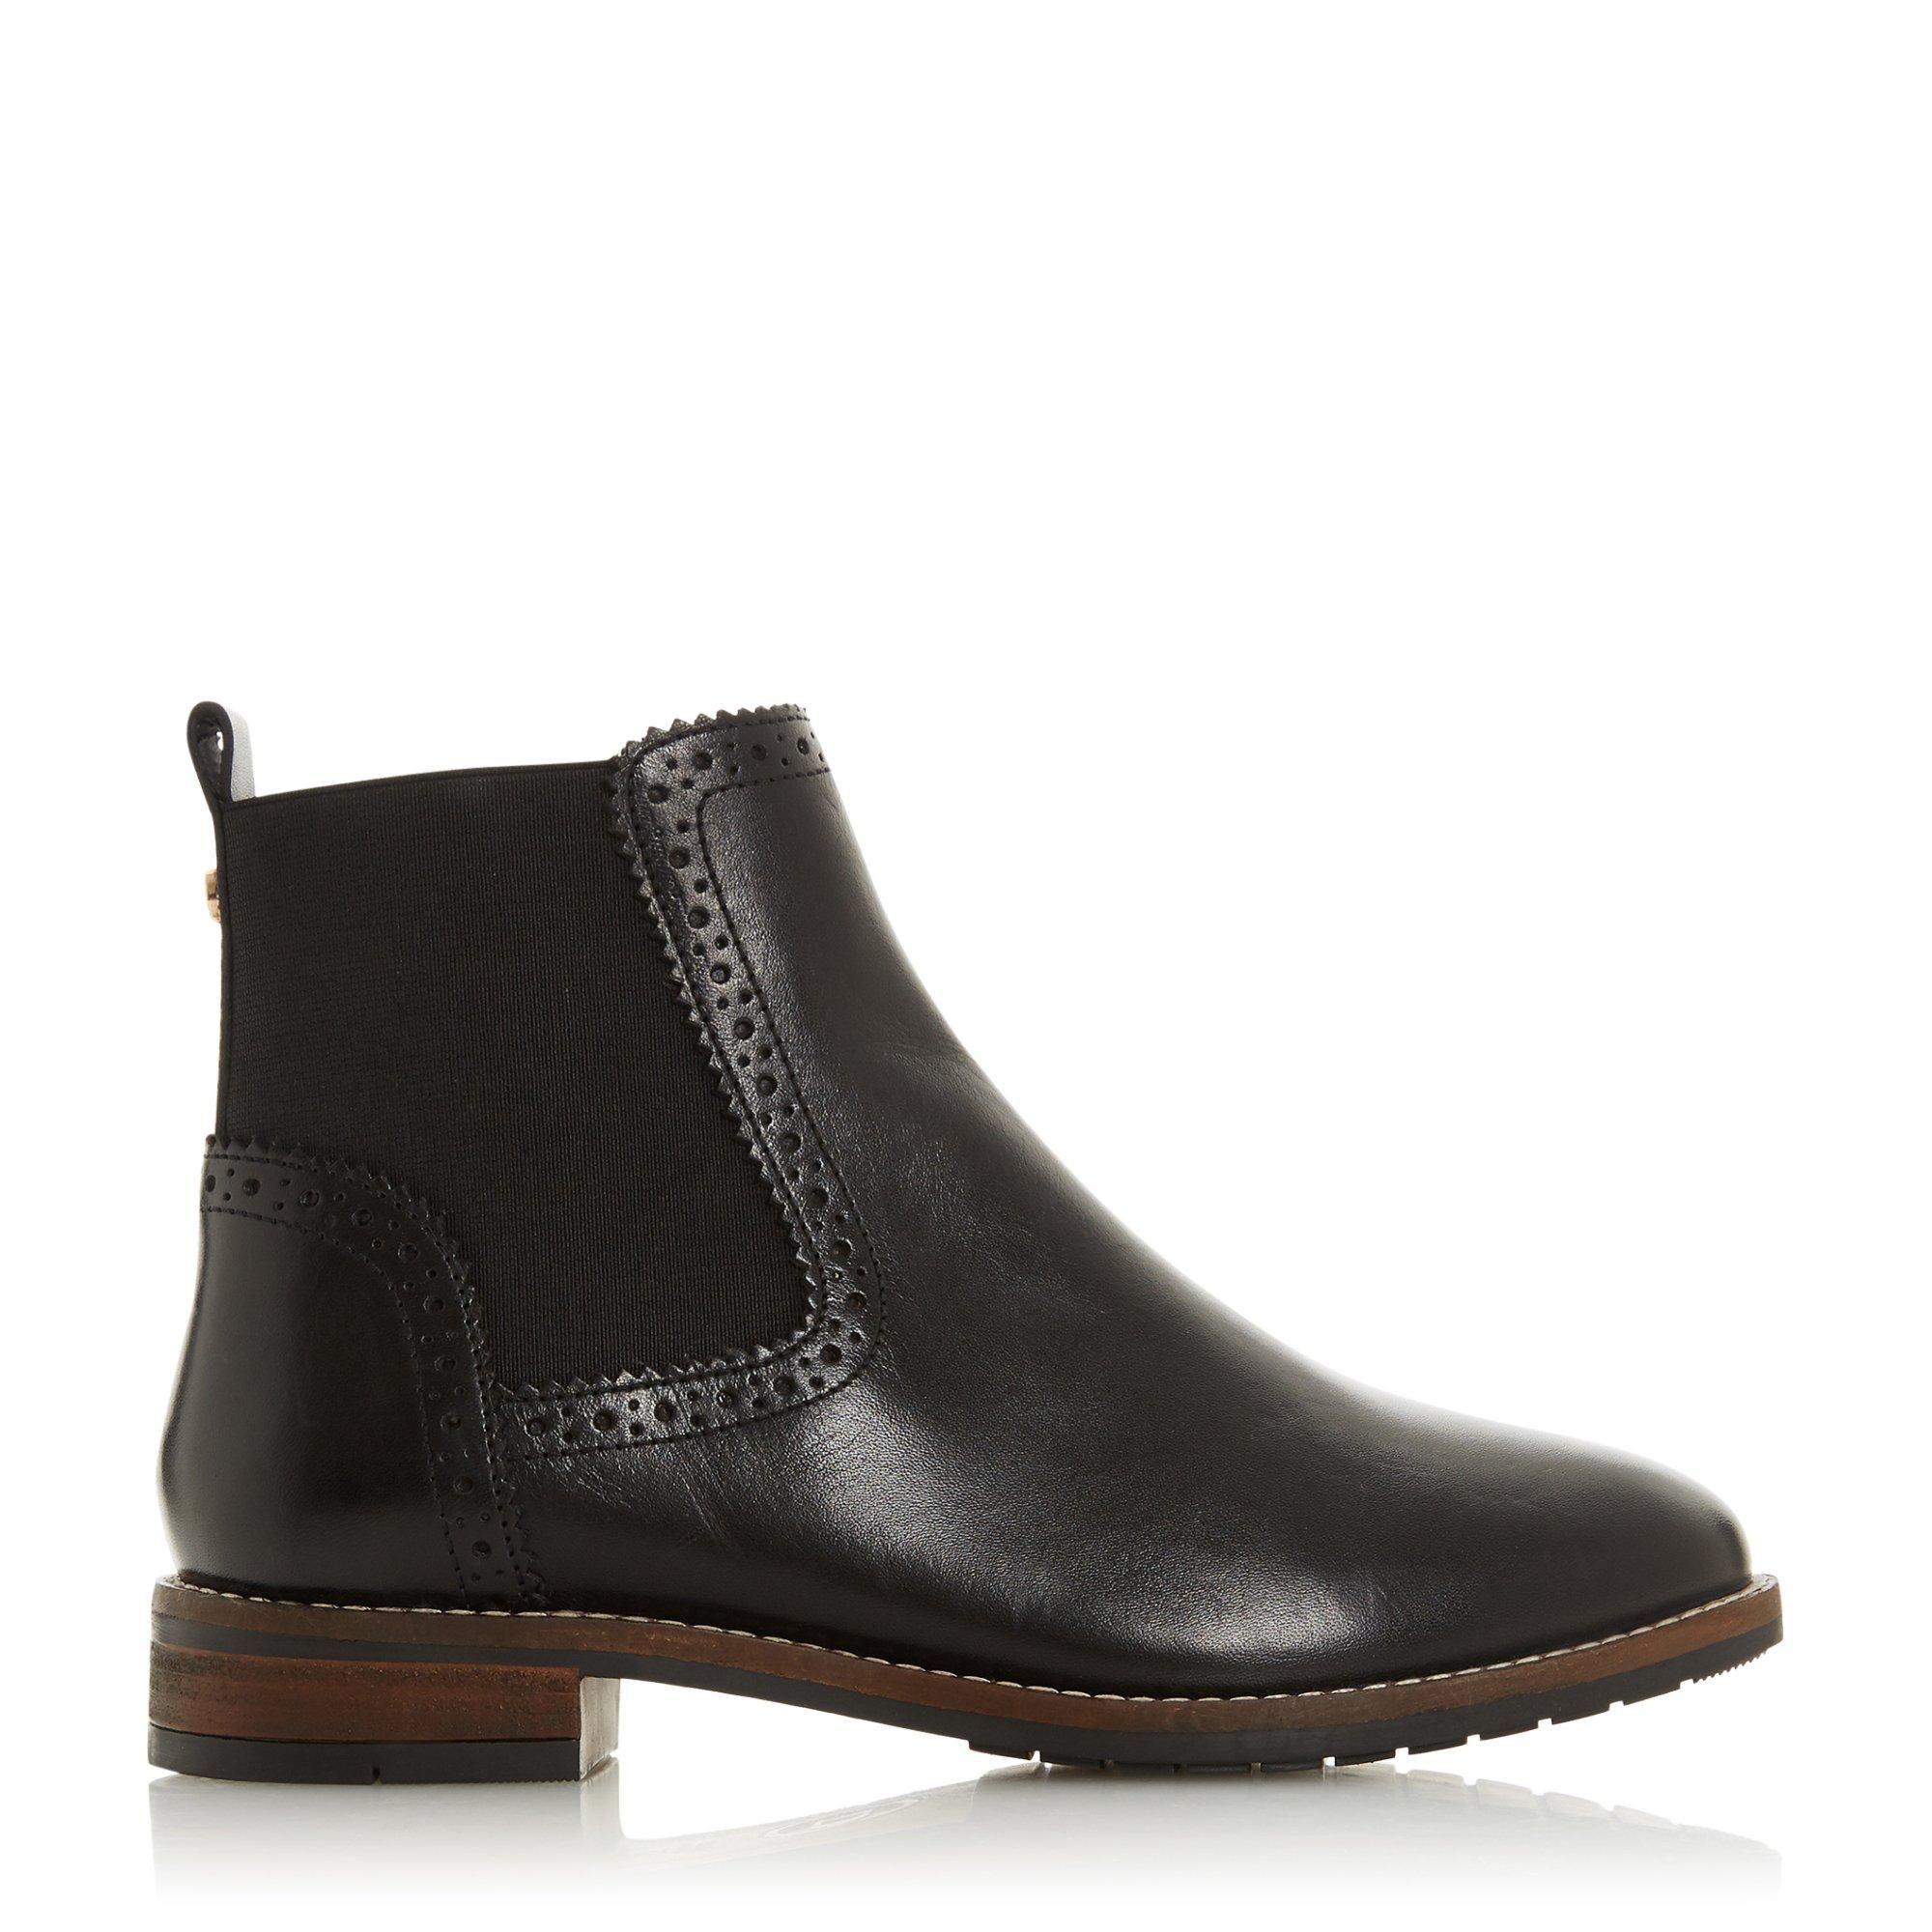 The Quant boot from Dune London is a combination of classic and modern. sty. Trimmed with brogue-inspired detailing on the elasticated side panel.. It's made from premium leather and features a pull tab on the back.